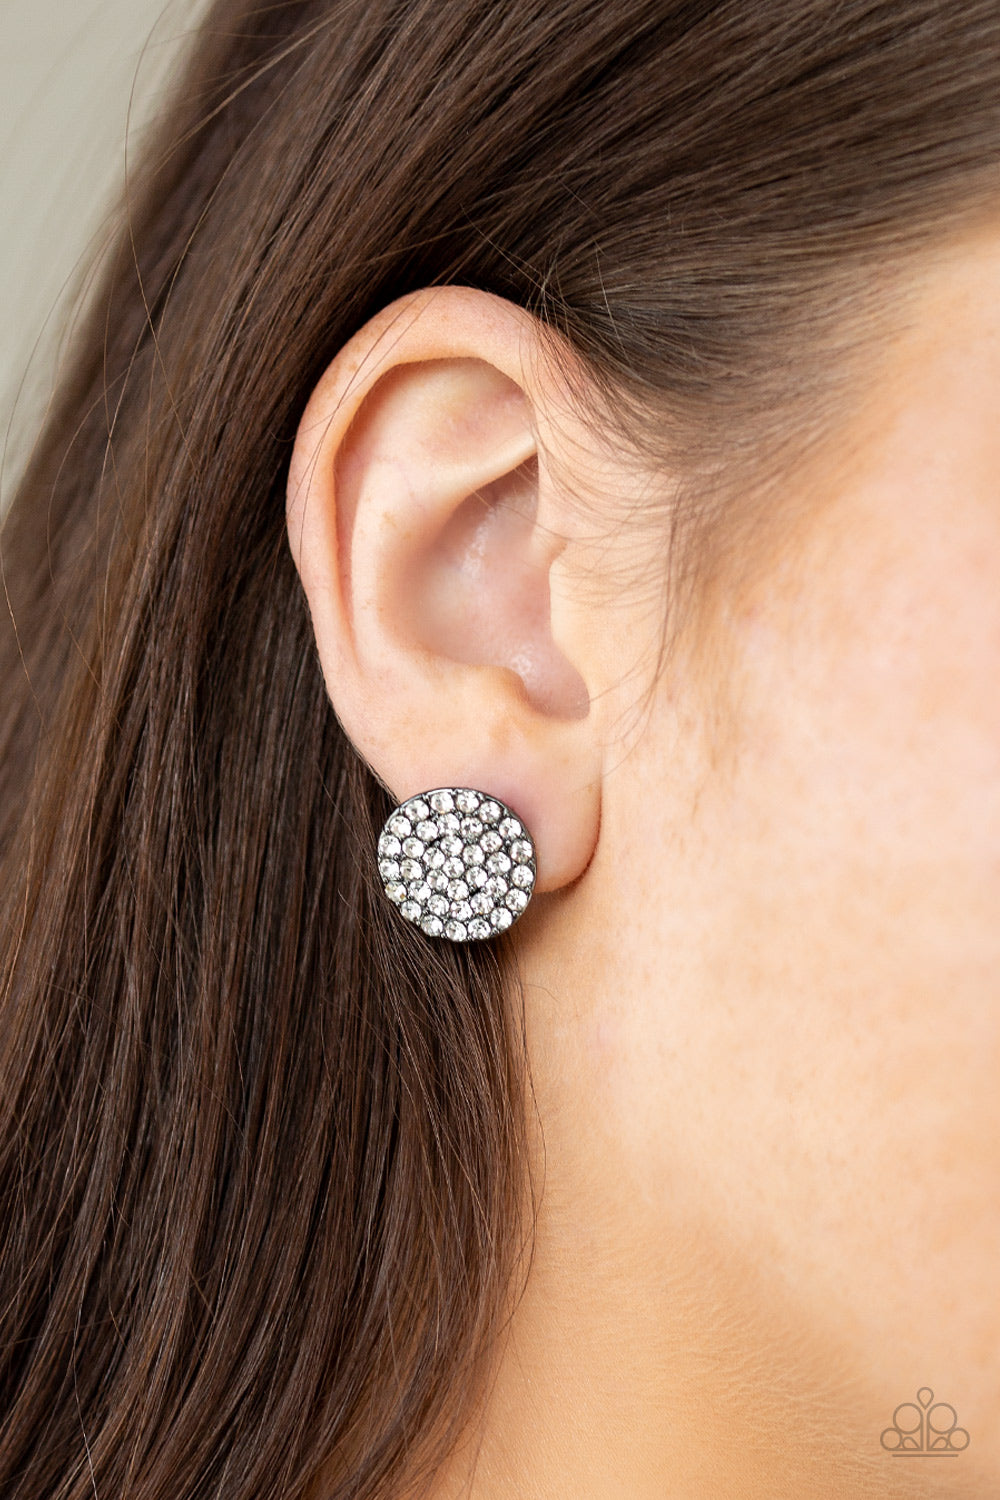 Greatest Of All Time Earrings - Black